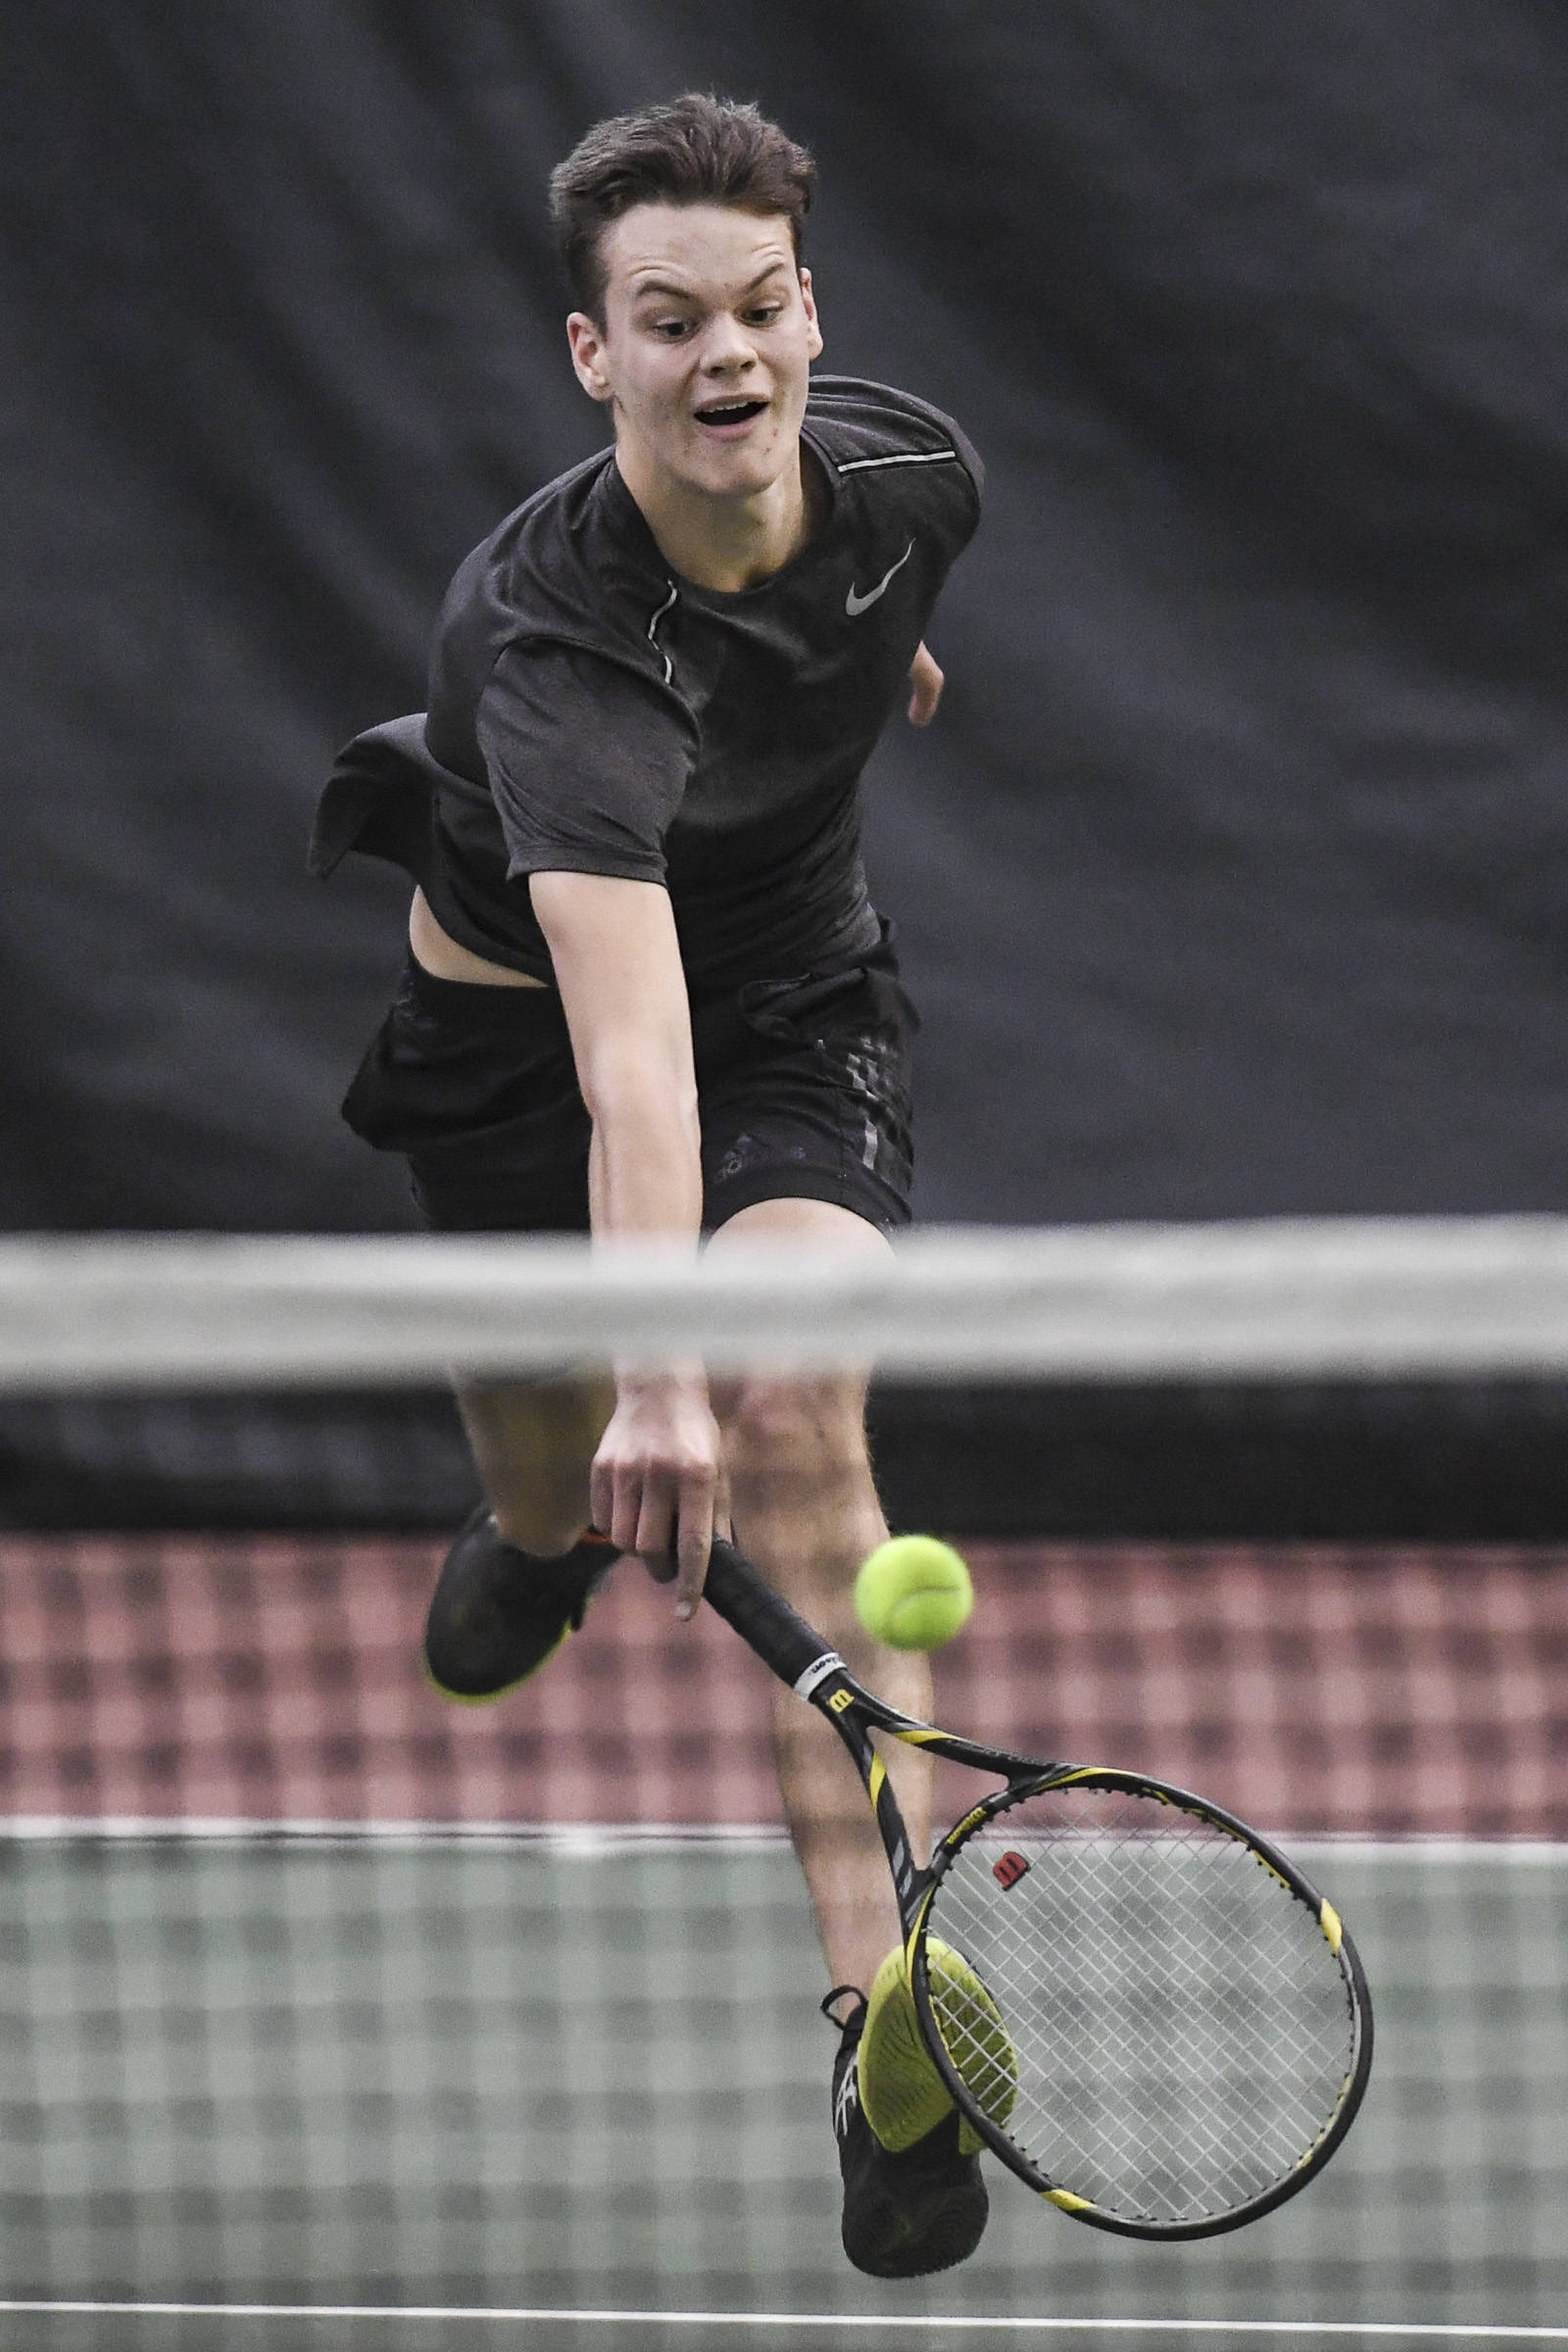 Kevin Kooistra chases down a ball against William Smoker in the boys singles’ final during the Region V Tennis Tournament at The Alaska Club/JRC on Sunday, Sept. 29, 2019. Kooistra won 6-0, 6-0. (Michael Penn | Juneau Empire)